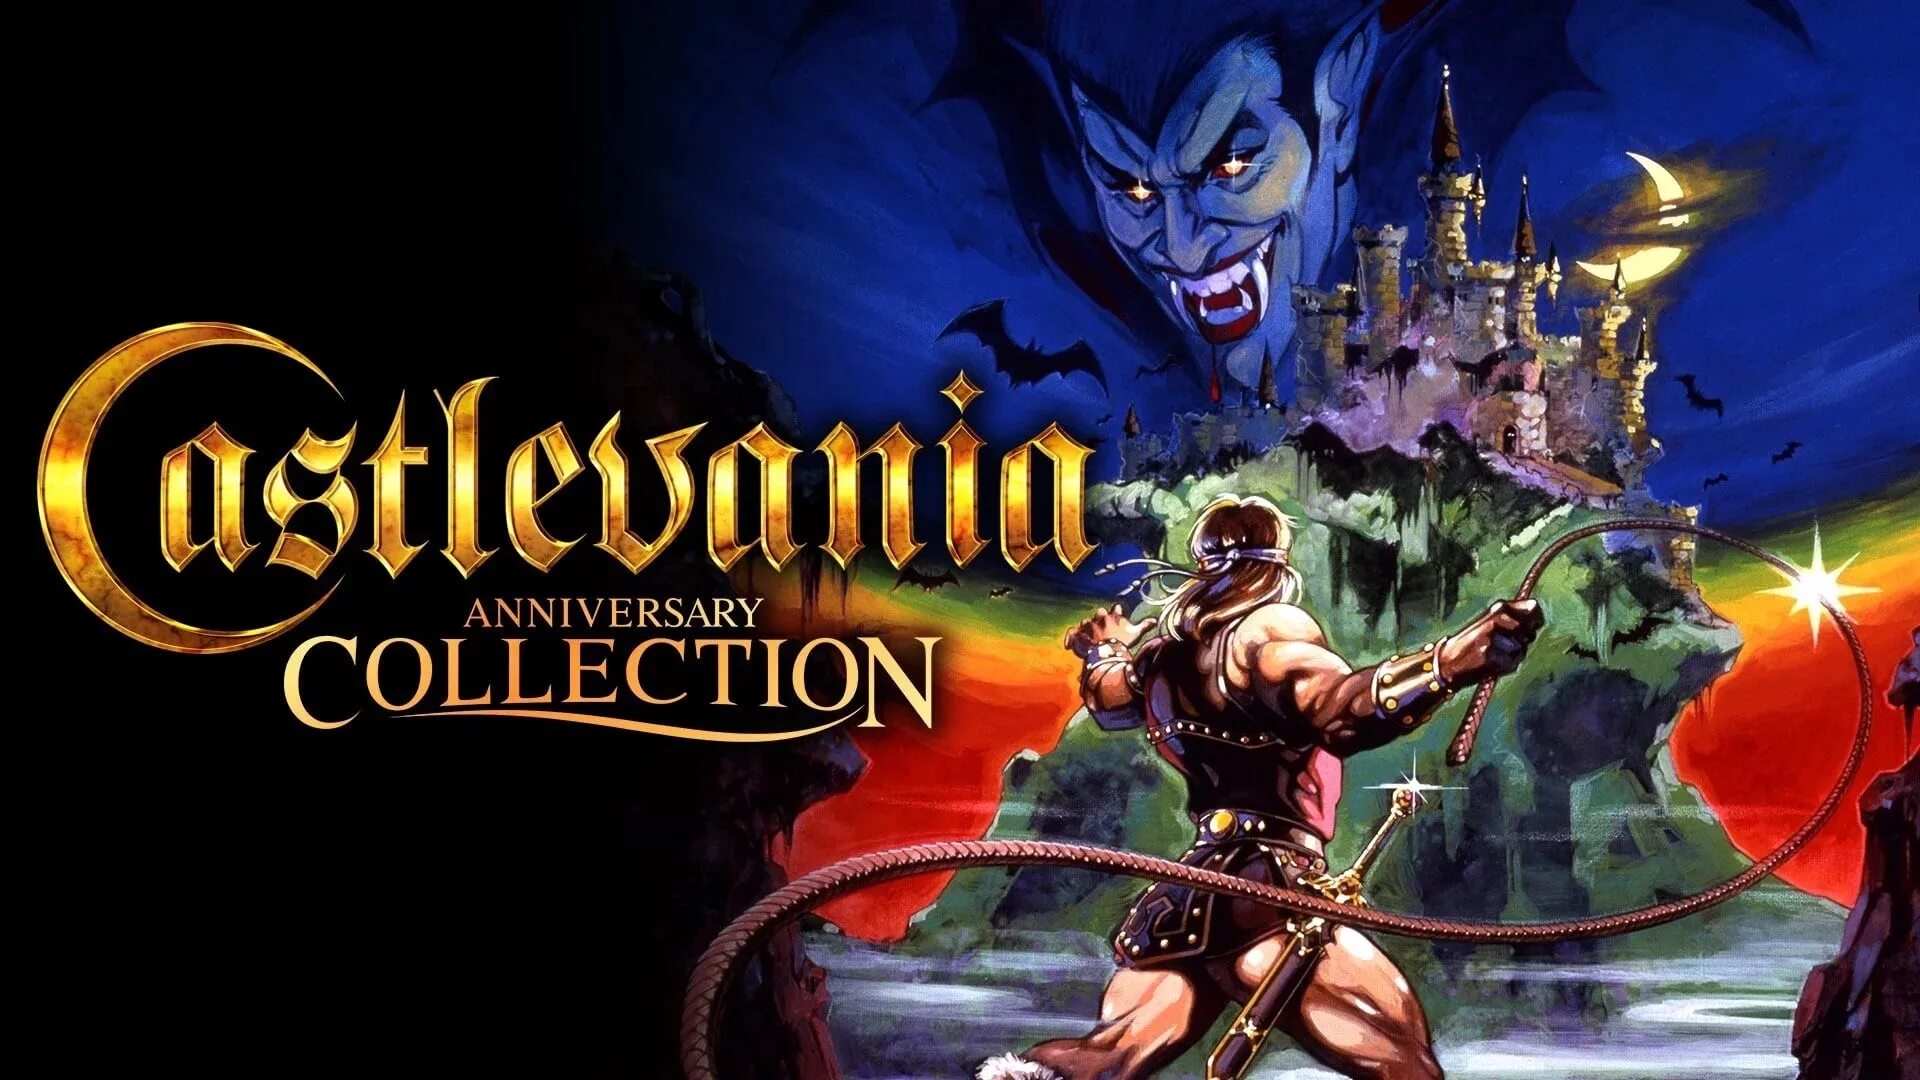 Castlevania Anniversary collection. Игра Castlevania Anniversary collection. Игра на Нинтендо Castlevania. Castlevania Advance collection Switch. Classic games collection